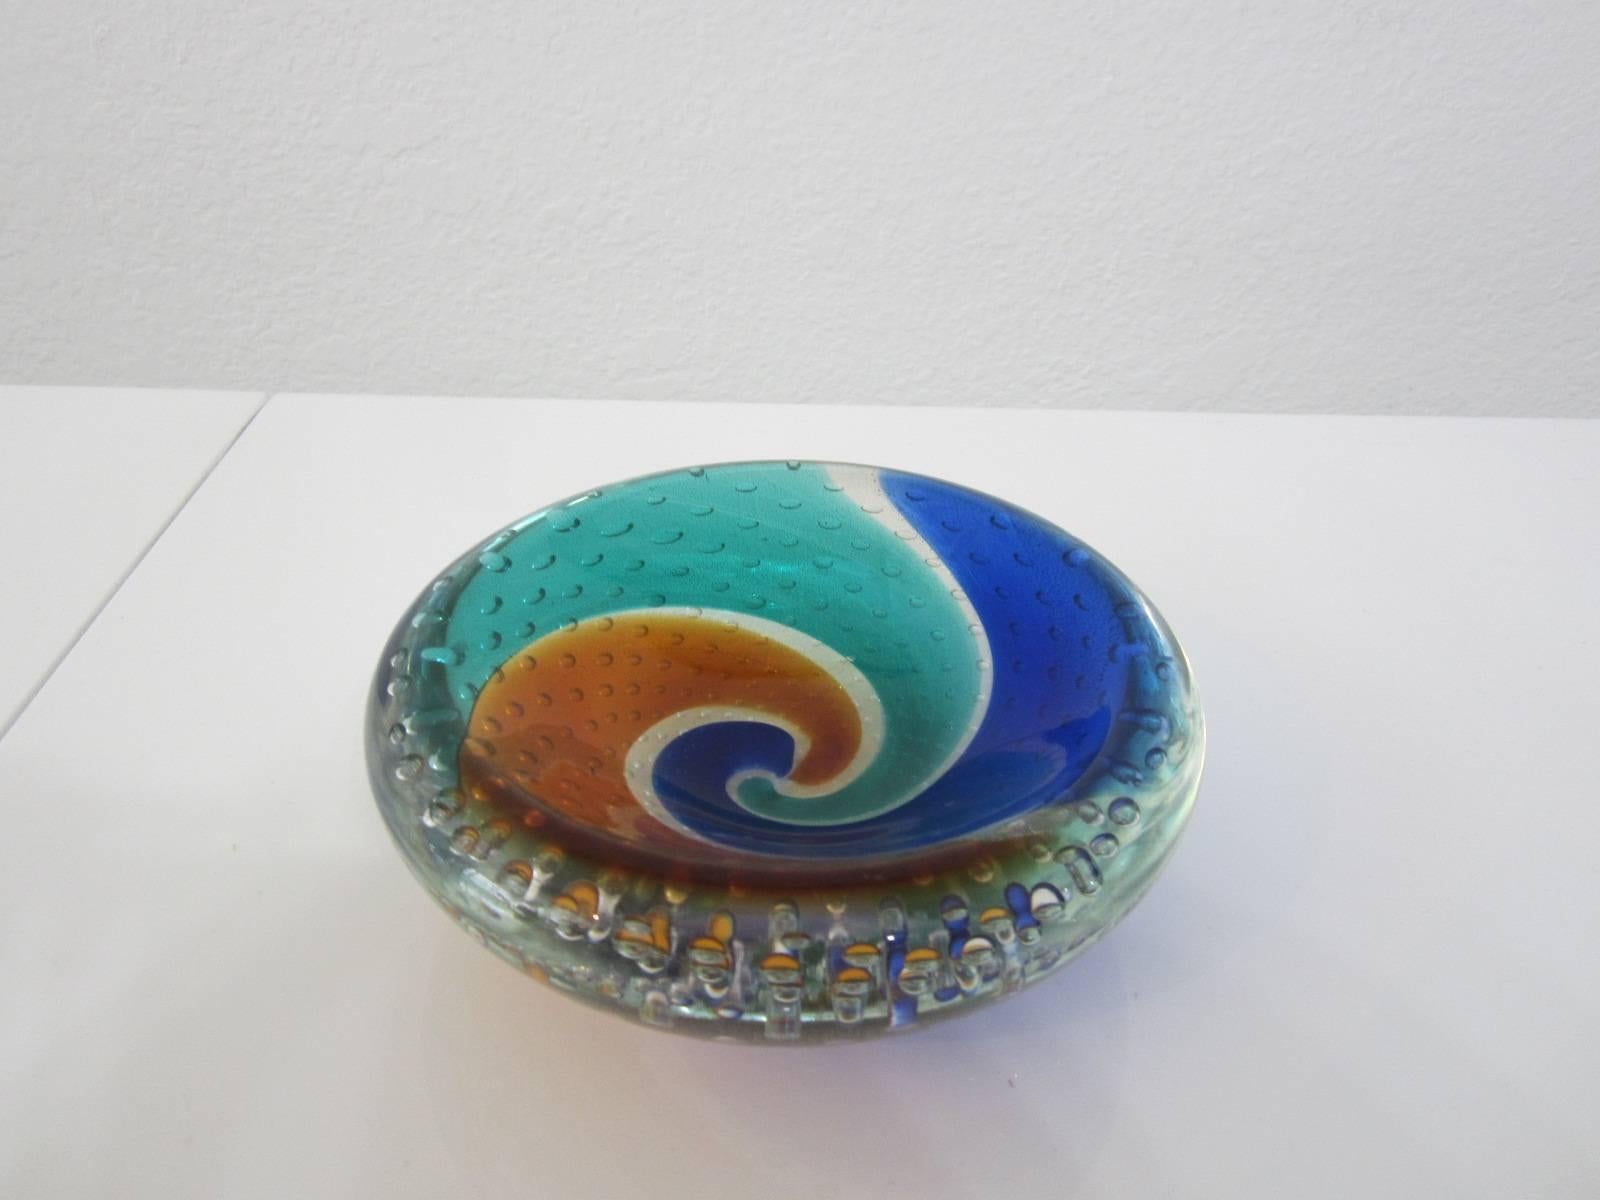 Gorgeous handblown Murano glass bowl with swirls of aqua, cobalt, and amber and filled with controlled bubbles and gold leaf flecking. Beautiful smooth shallow-dip bowl great for display and for utilitarian use.